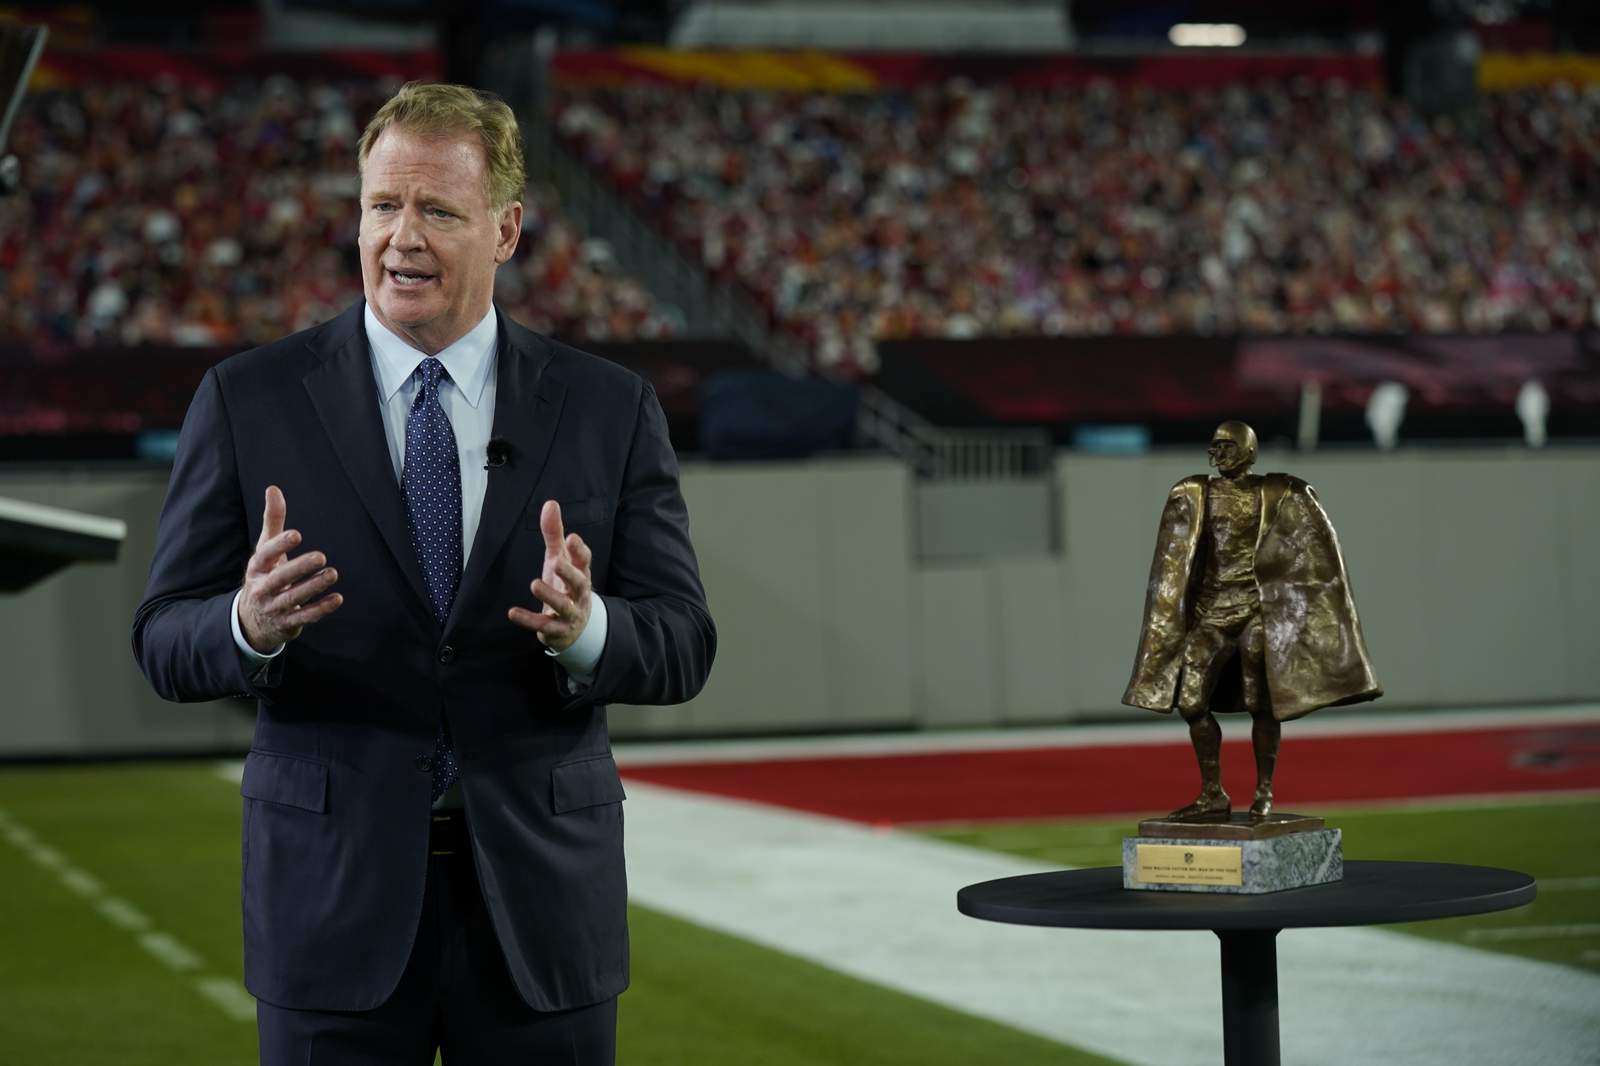 Goodell: NFL learnings from 2020 technology here to stay